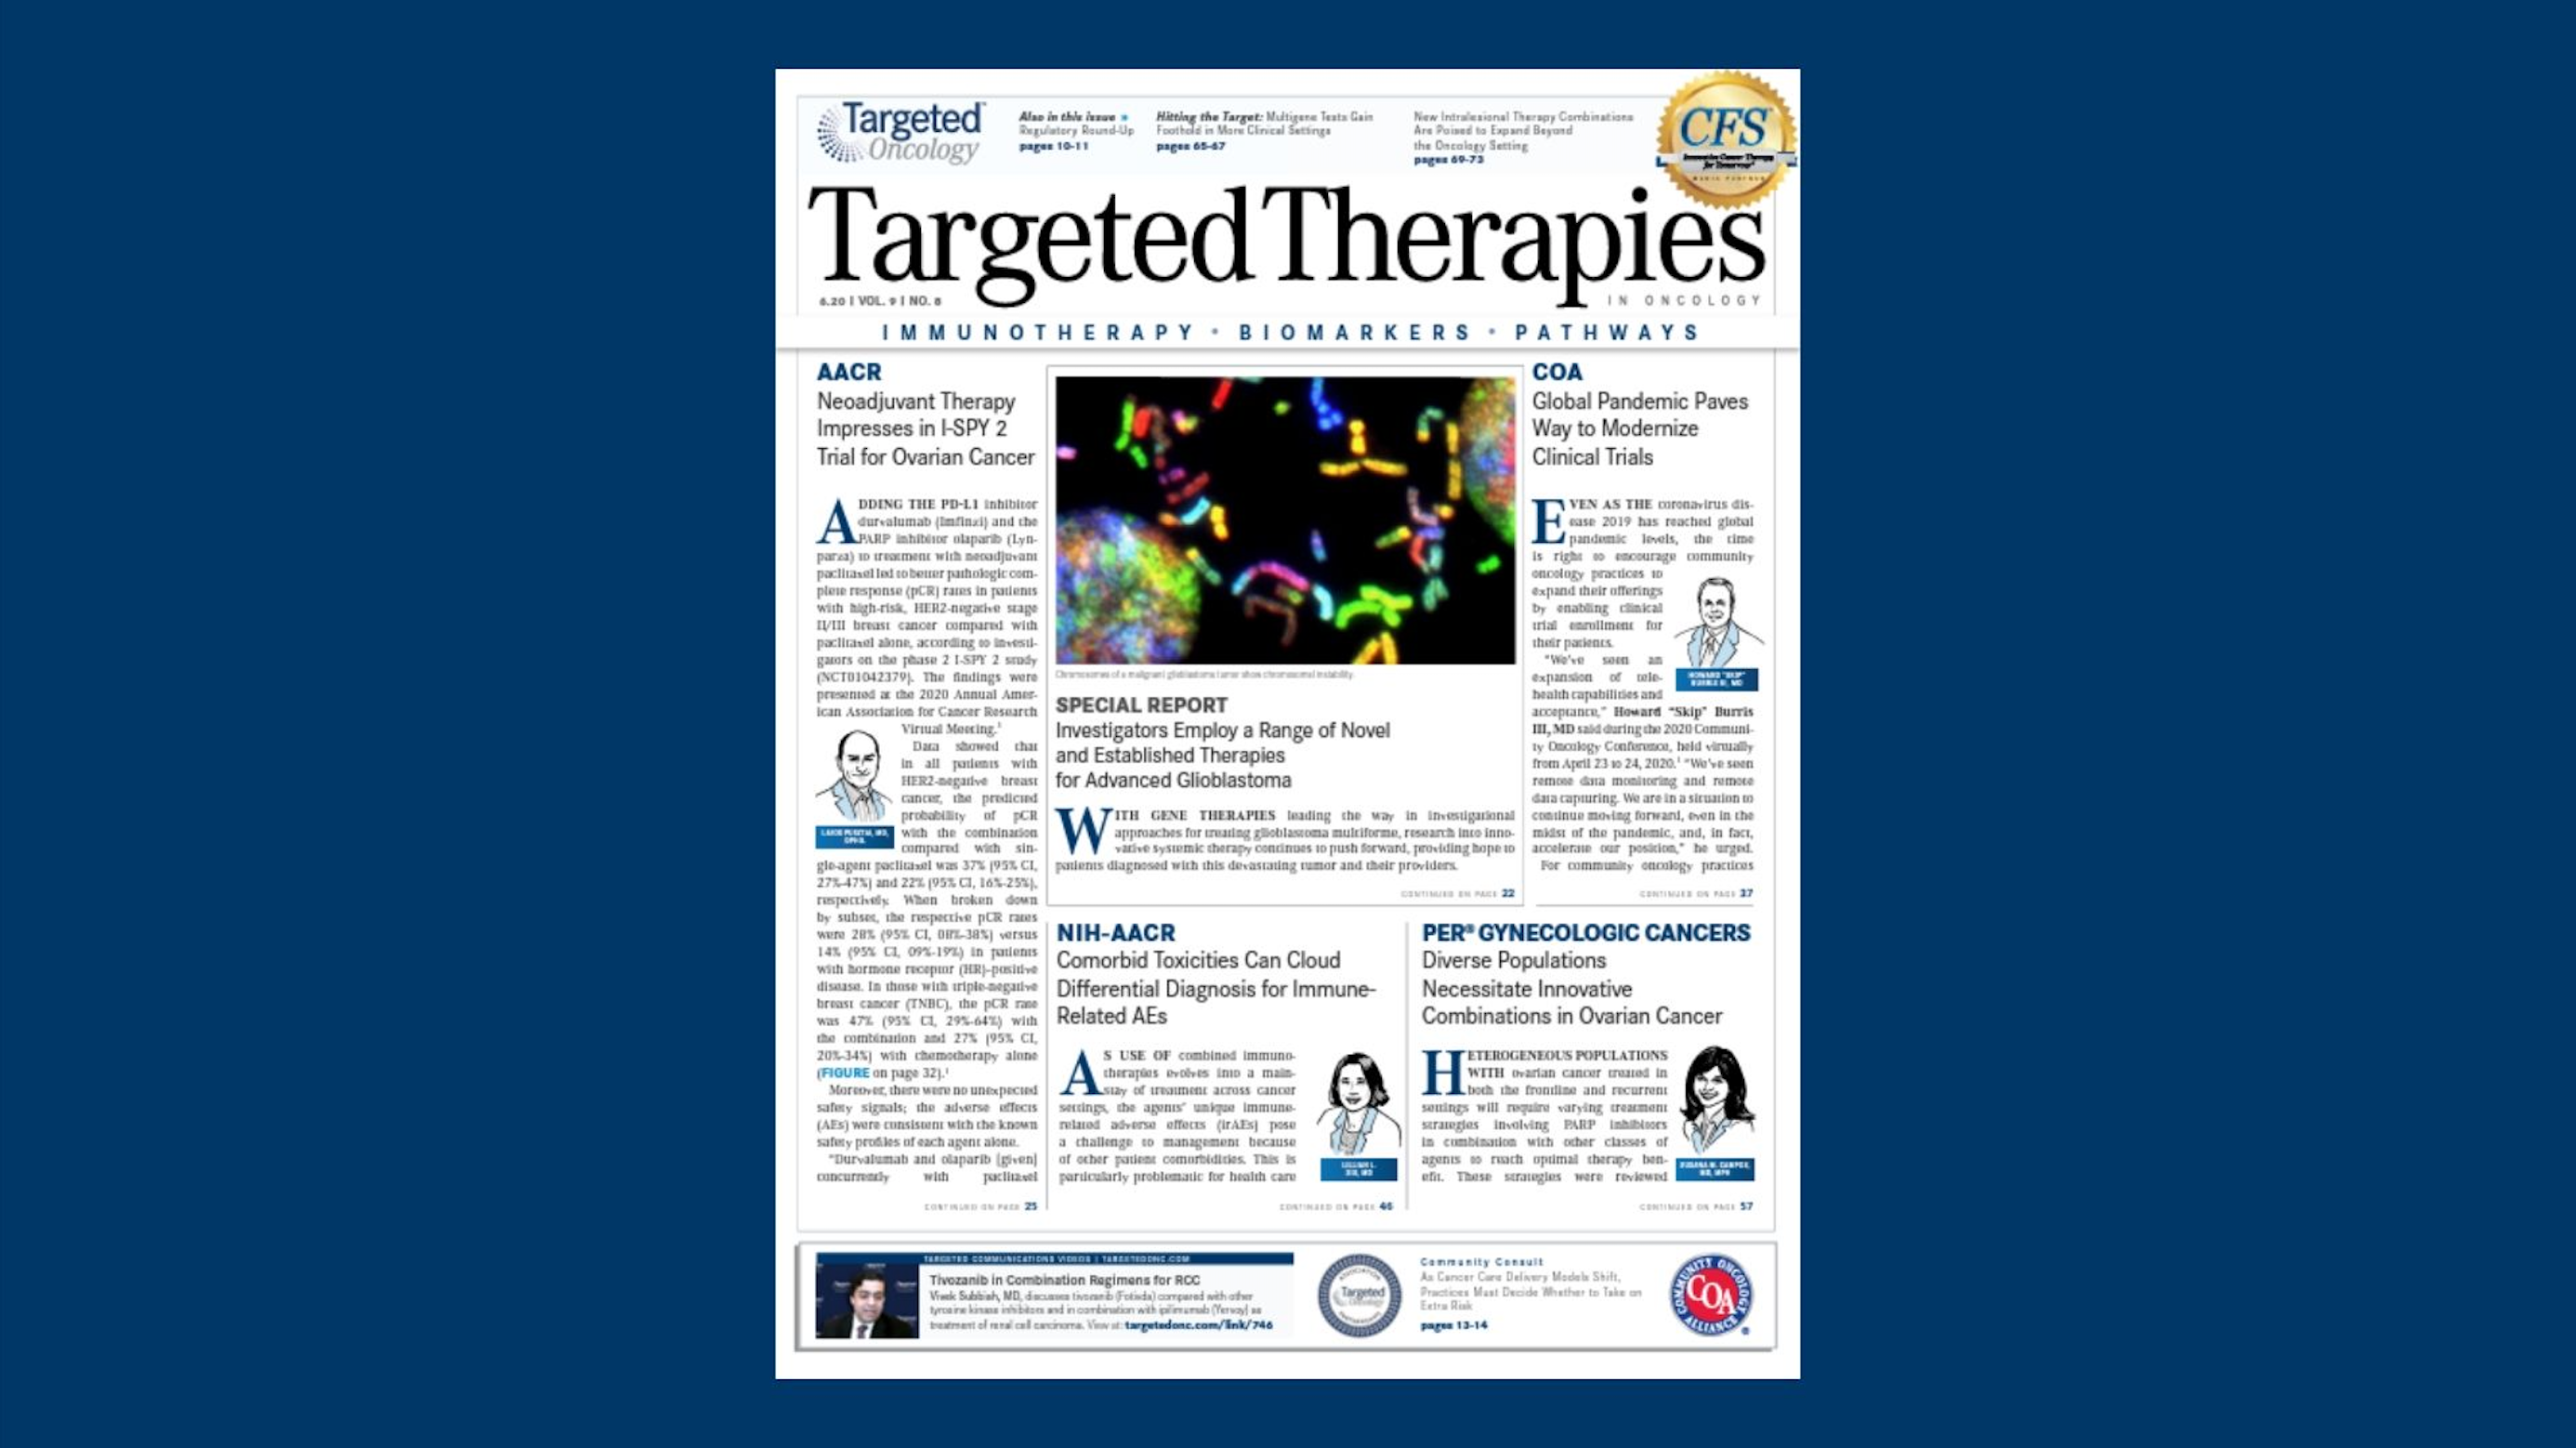 Anti–PD-1/PD-L1 Immunotherapies Continue to Impress in Unique Combinations